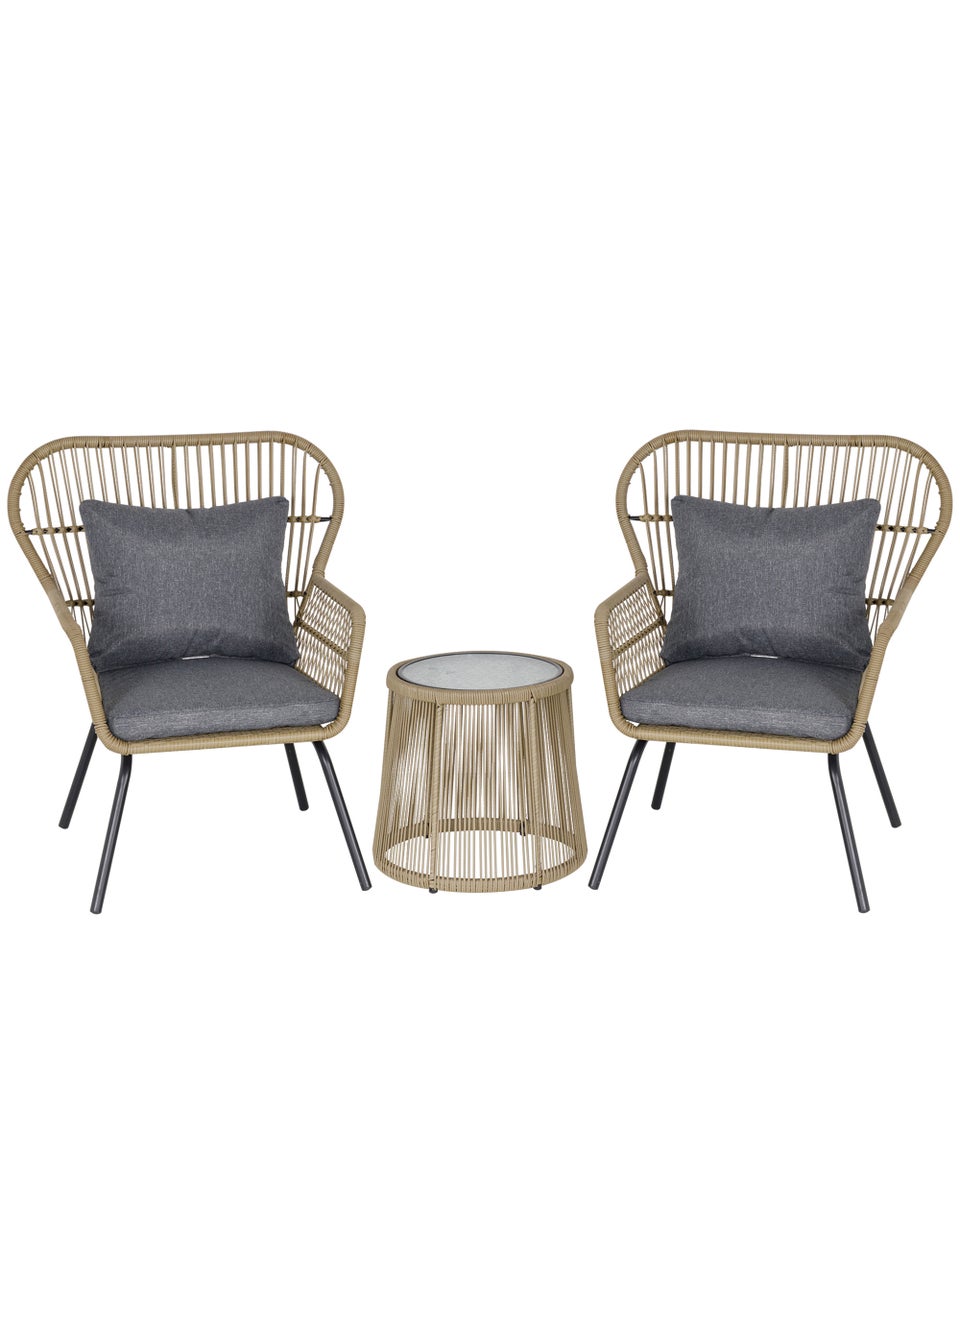 Outsunny 3 Piece Rattan Garden Furniture Set with Cushions